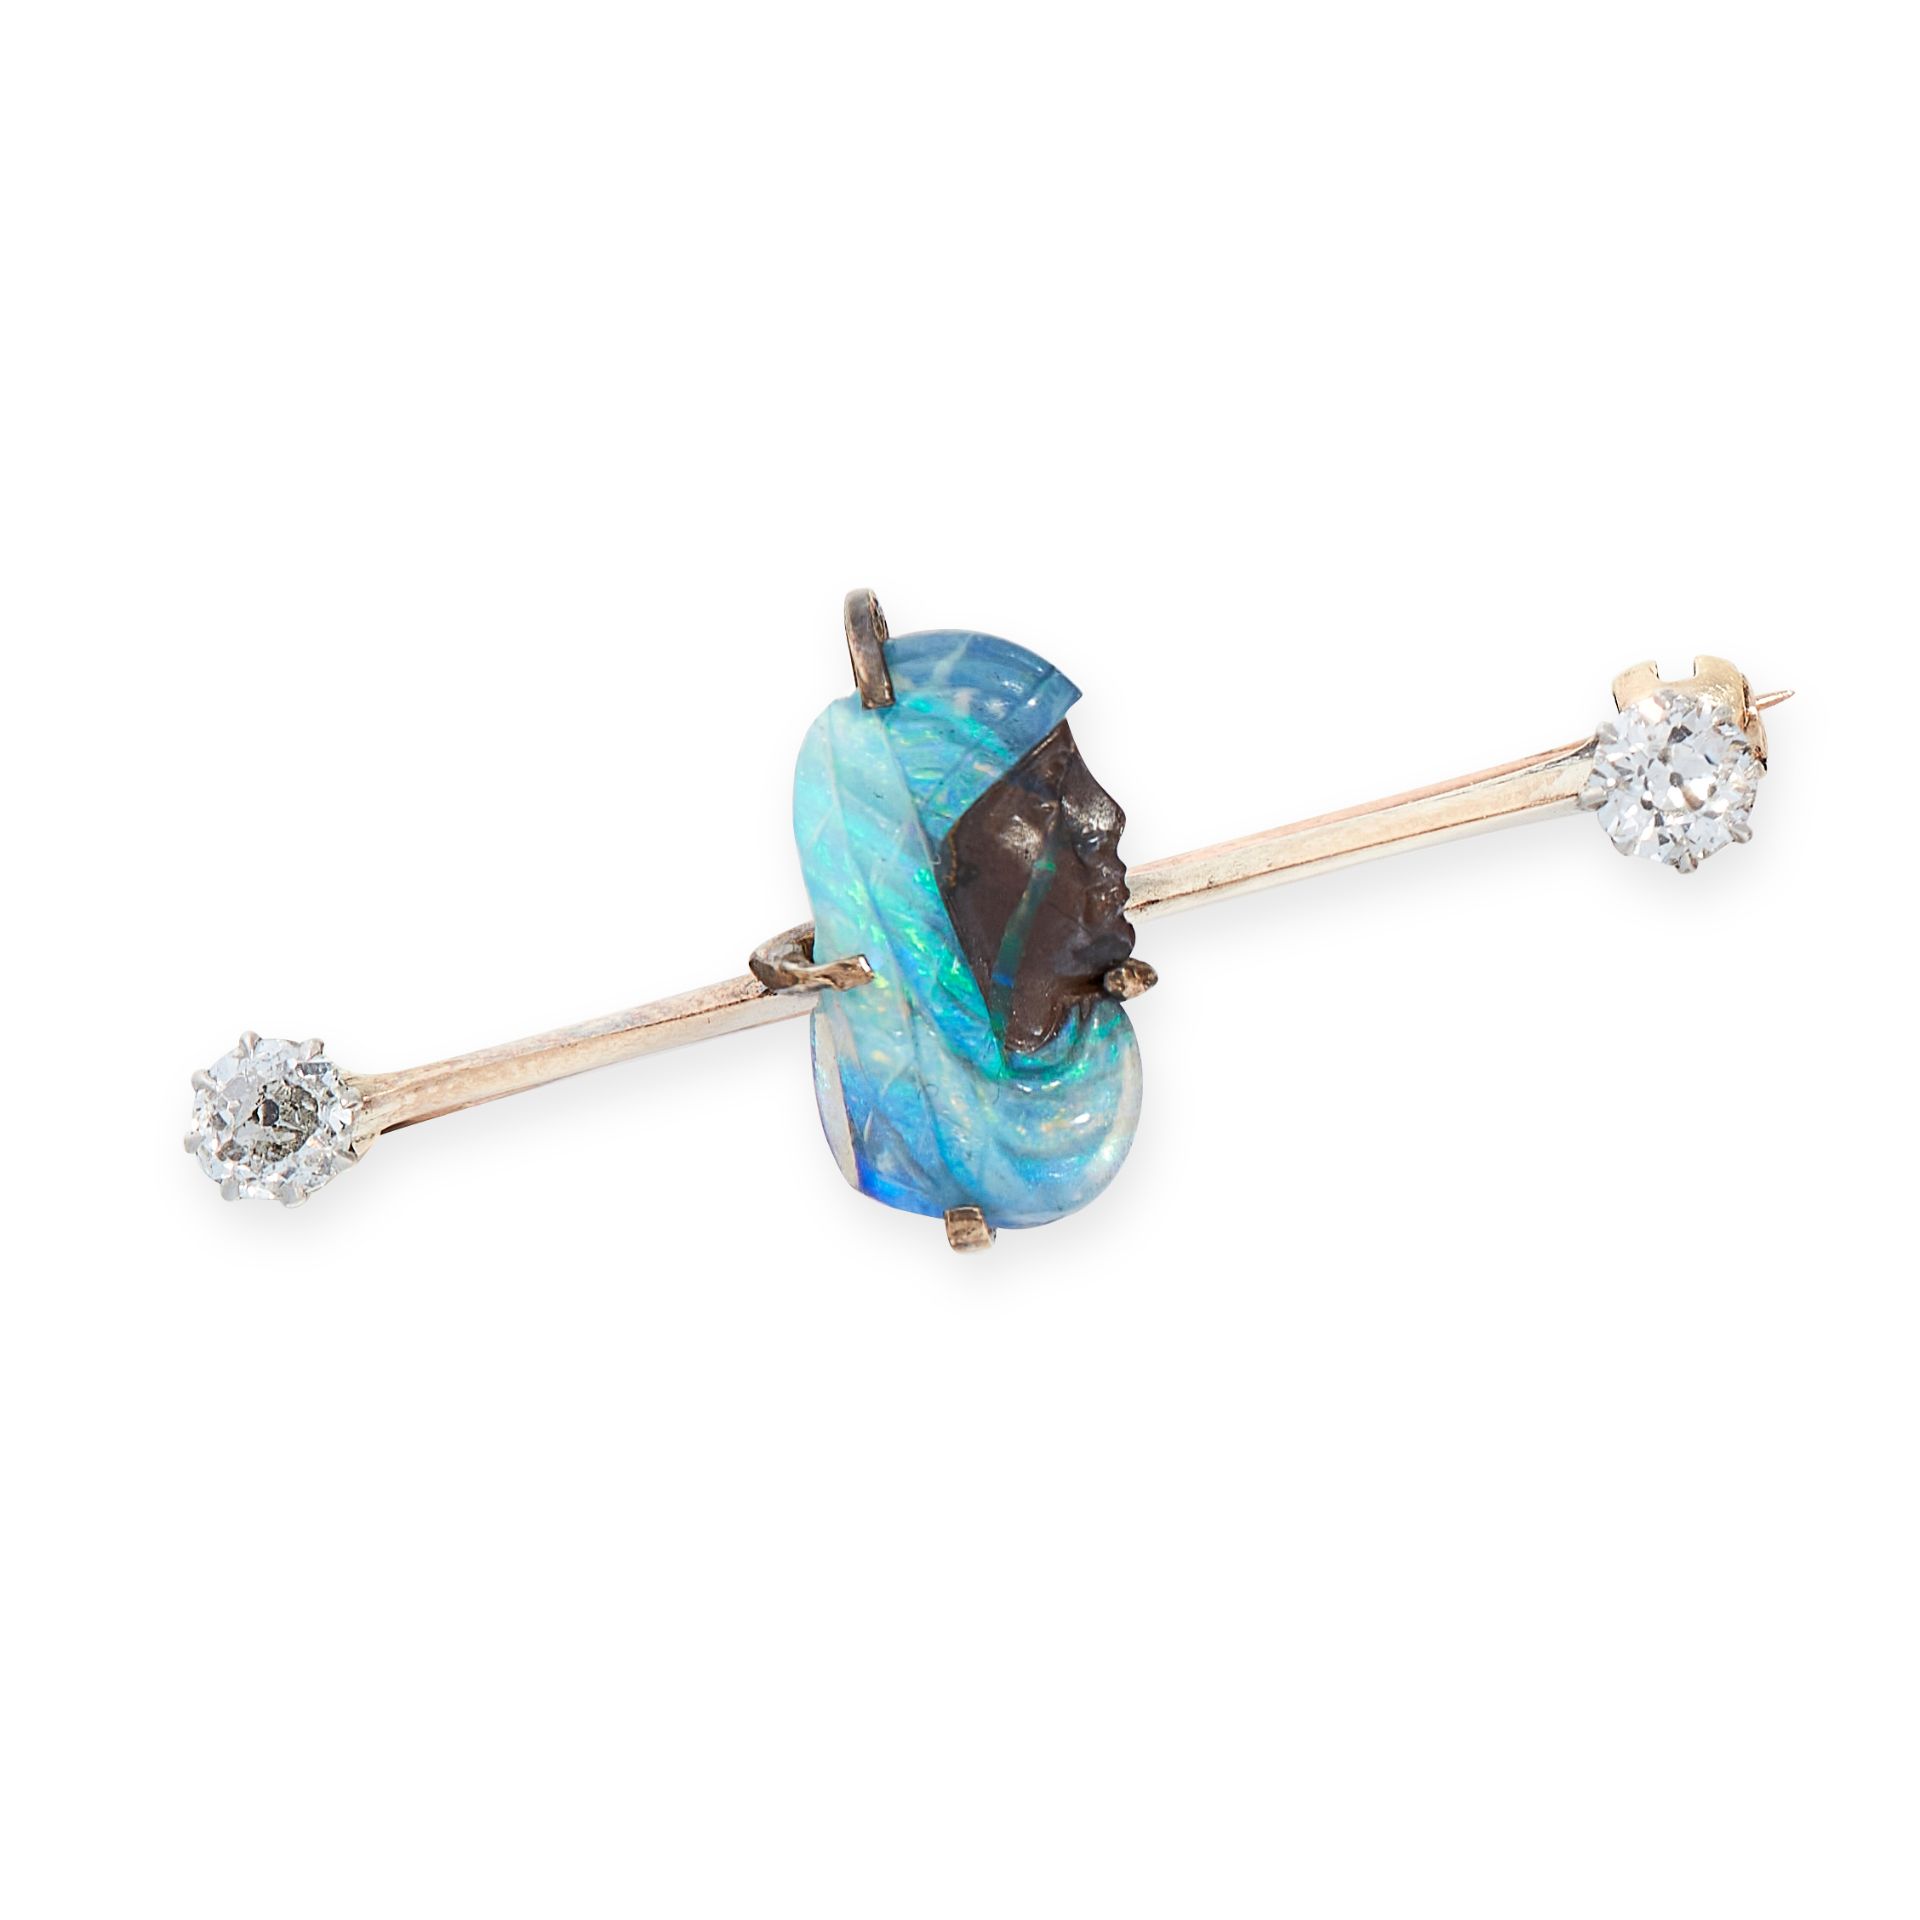 AN ANTIQUE OPAL AND DIAMOND BROOCH in yellow gold, set with a boulder opal, carved in detail to